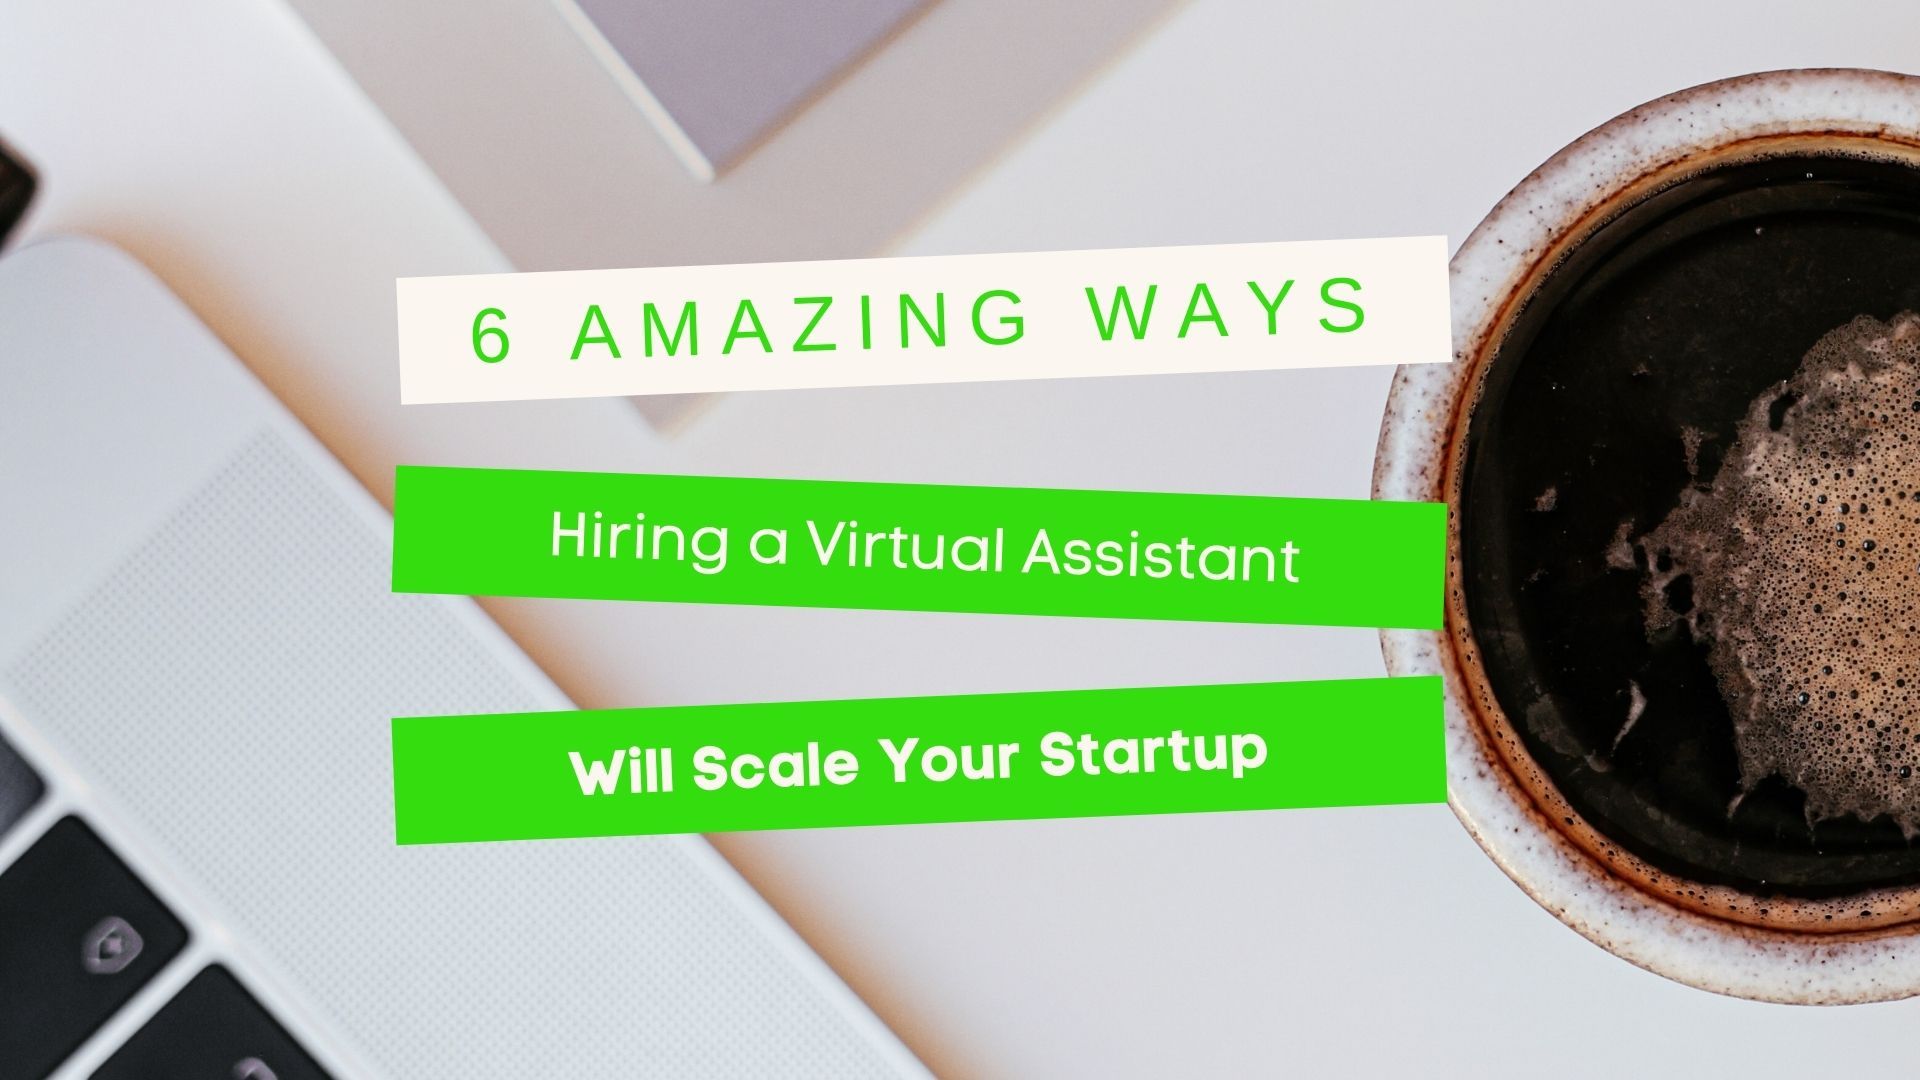 How a Virtual Assistant Can Help Scale Your Startup